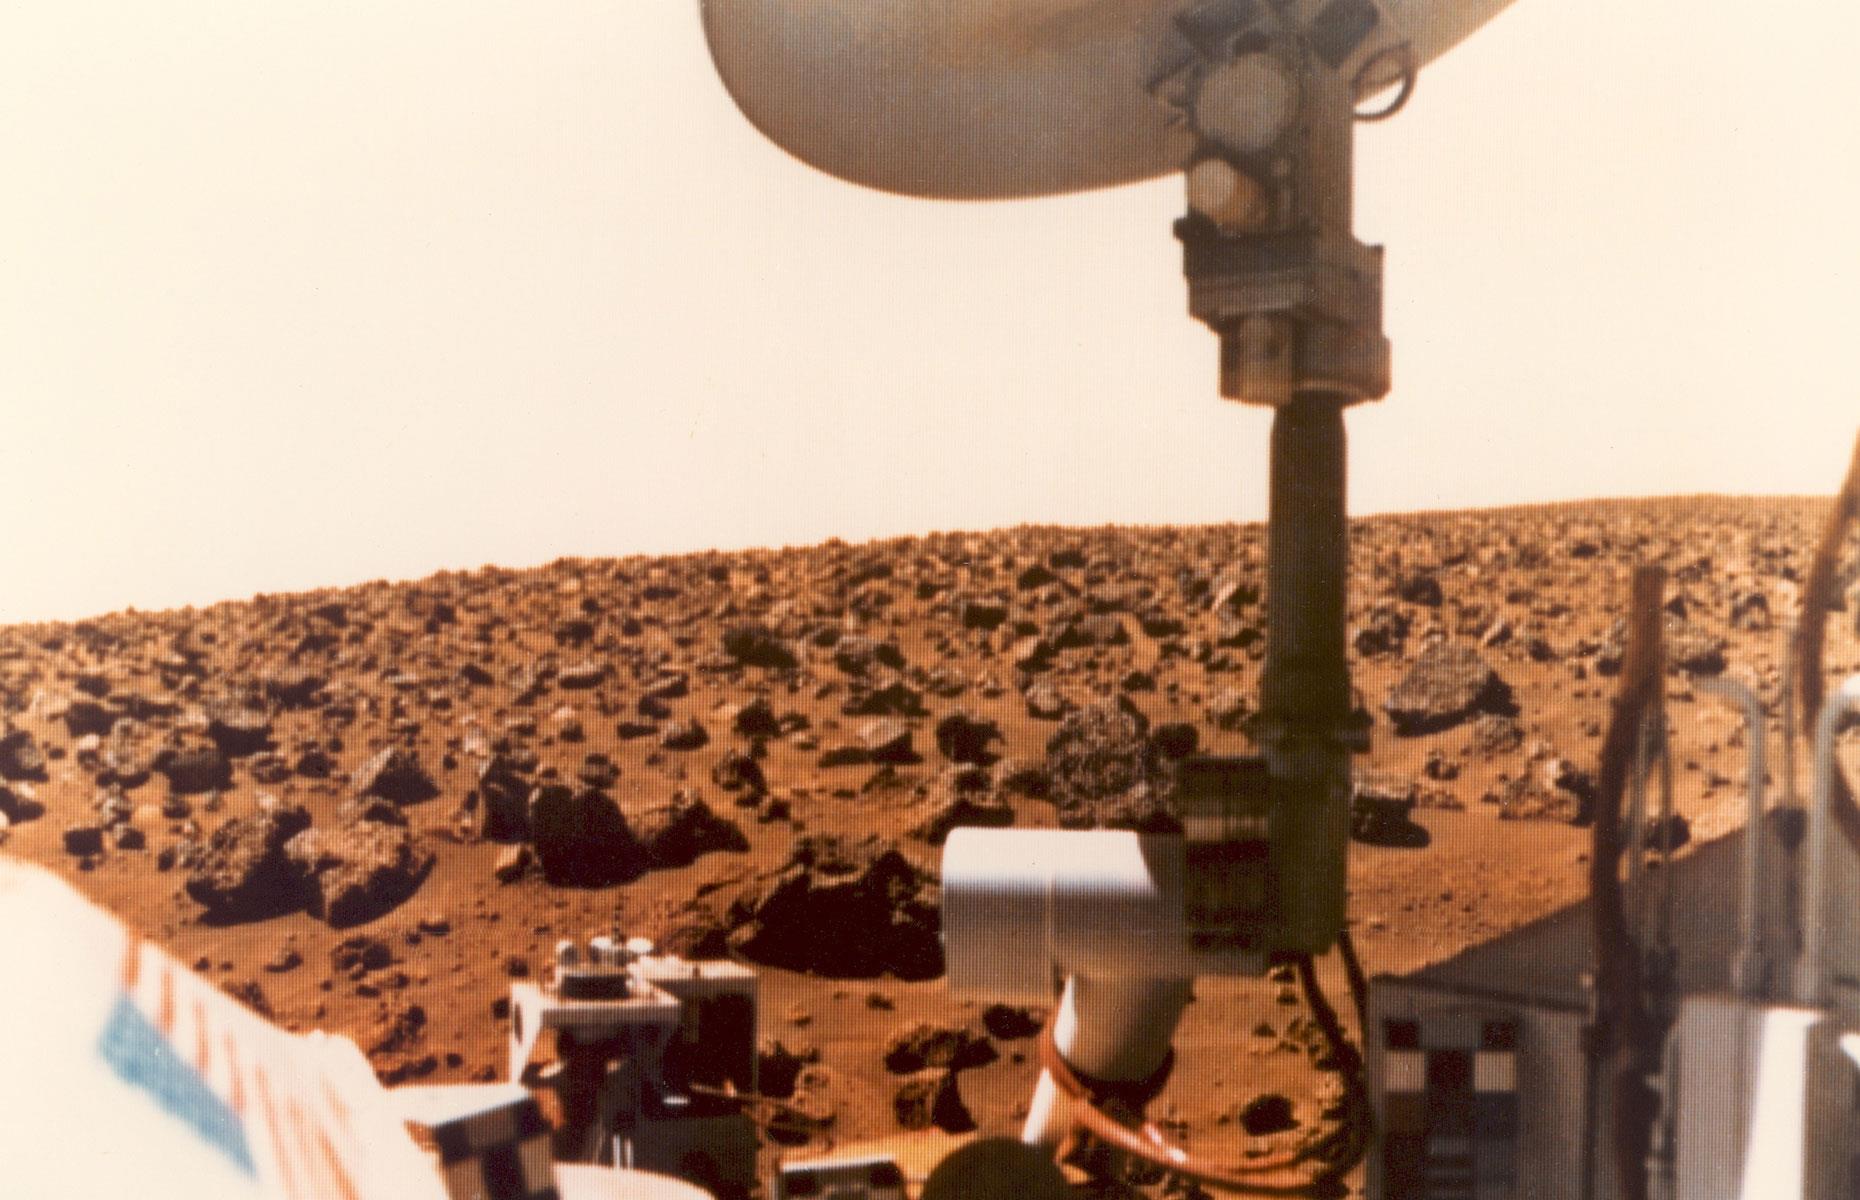 NASA's Viking 1 was the first spacecraft to land on Mars, touching down on the Red Planet on 20 July 1976, and remains where it landed, on the Chryse Planitia (Golden Plain) in the northern equatorial region of the planet.